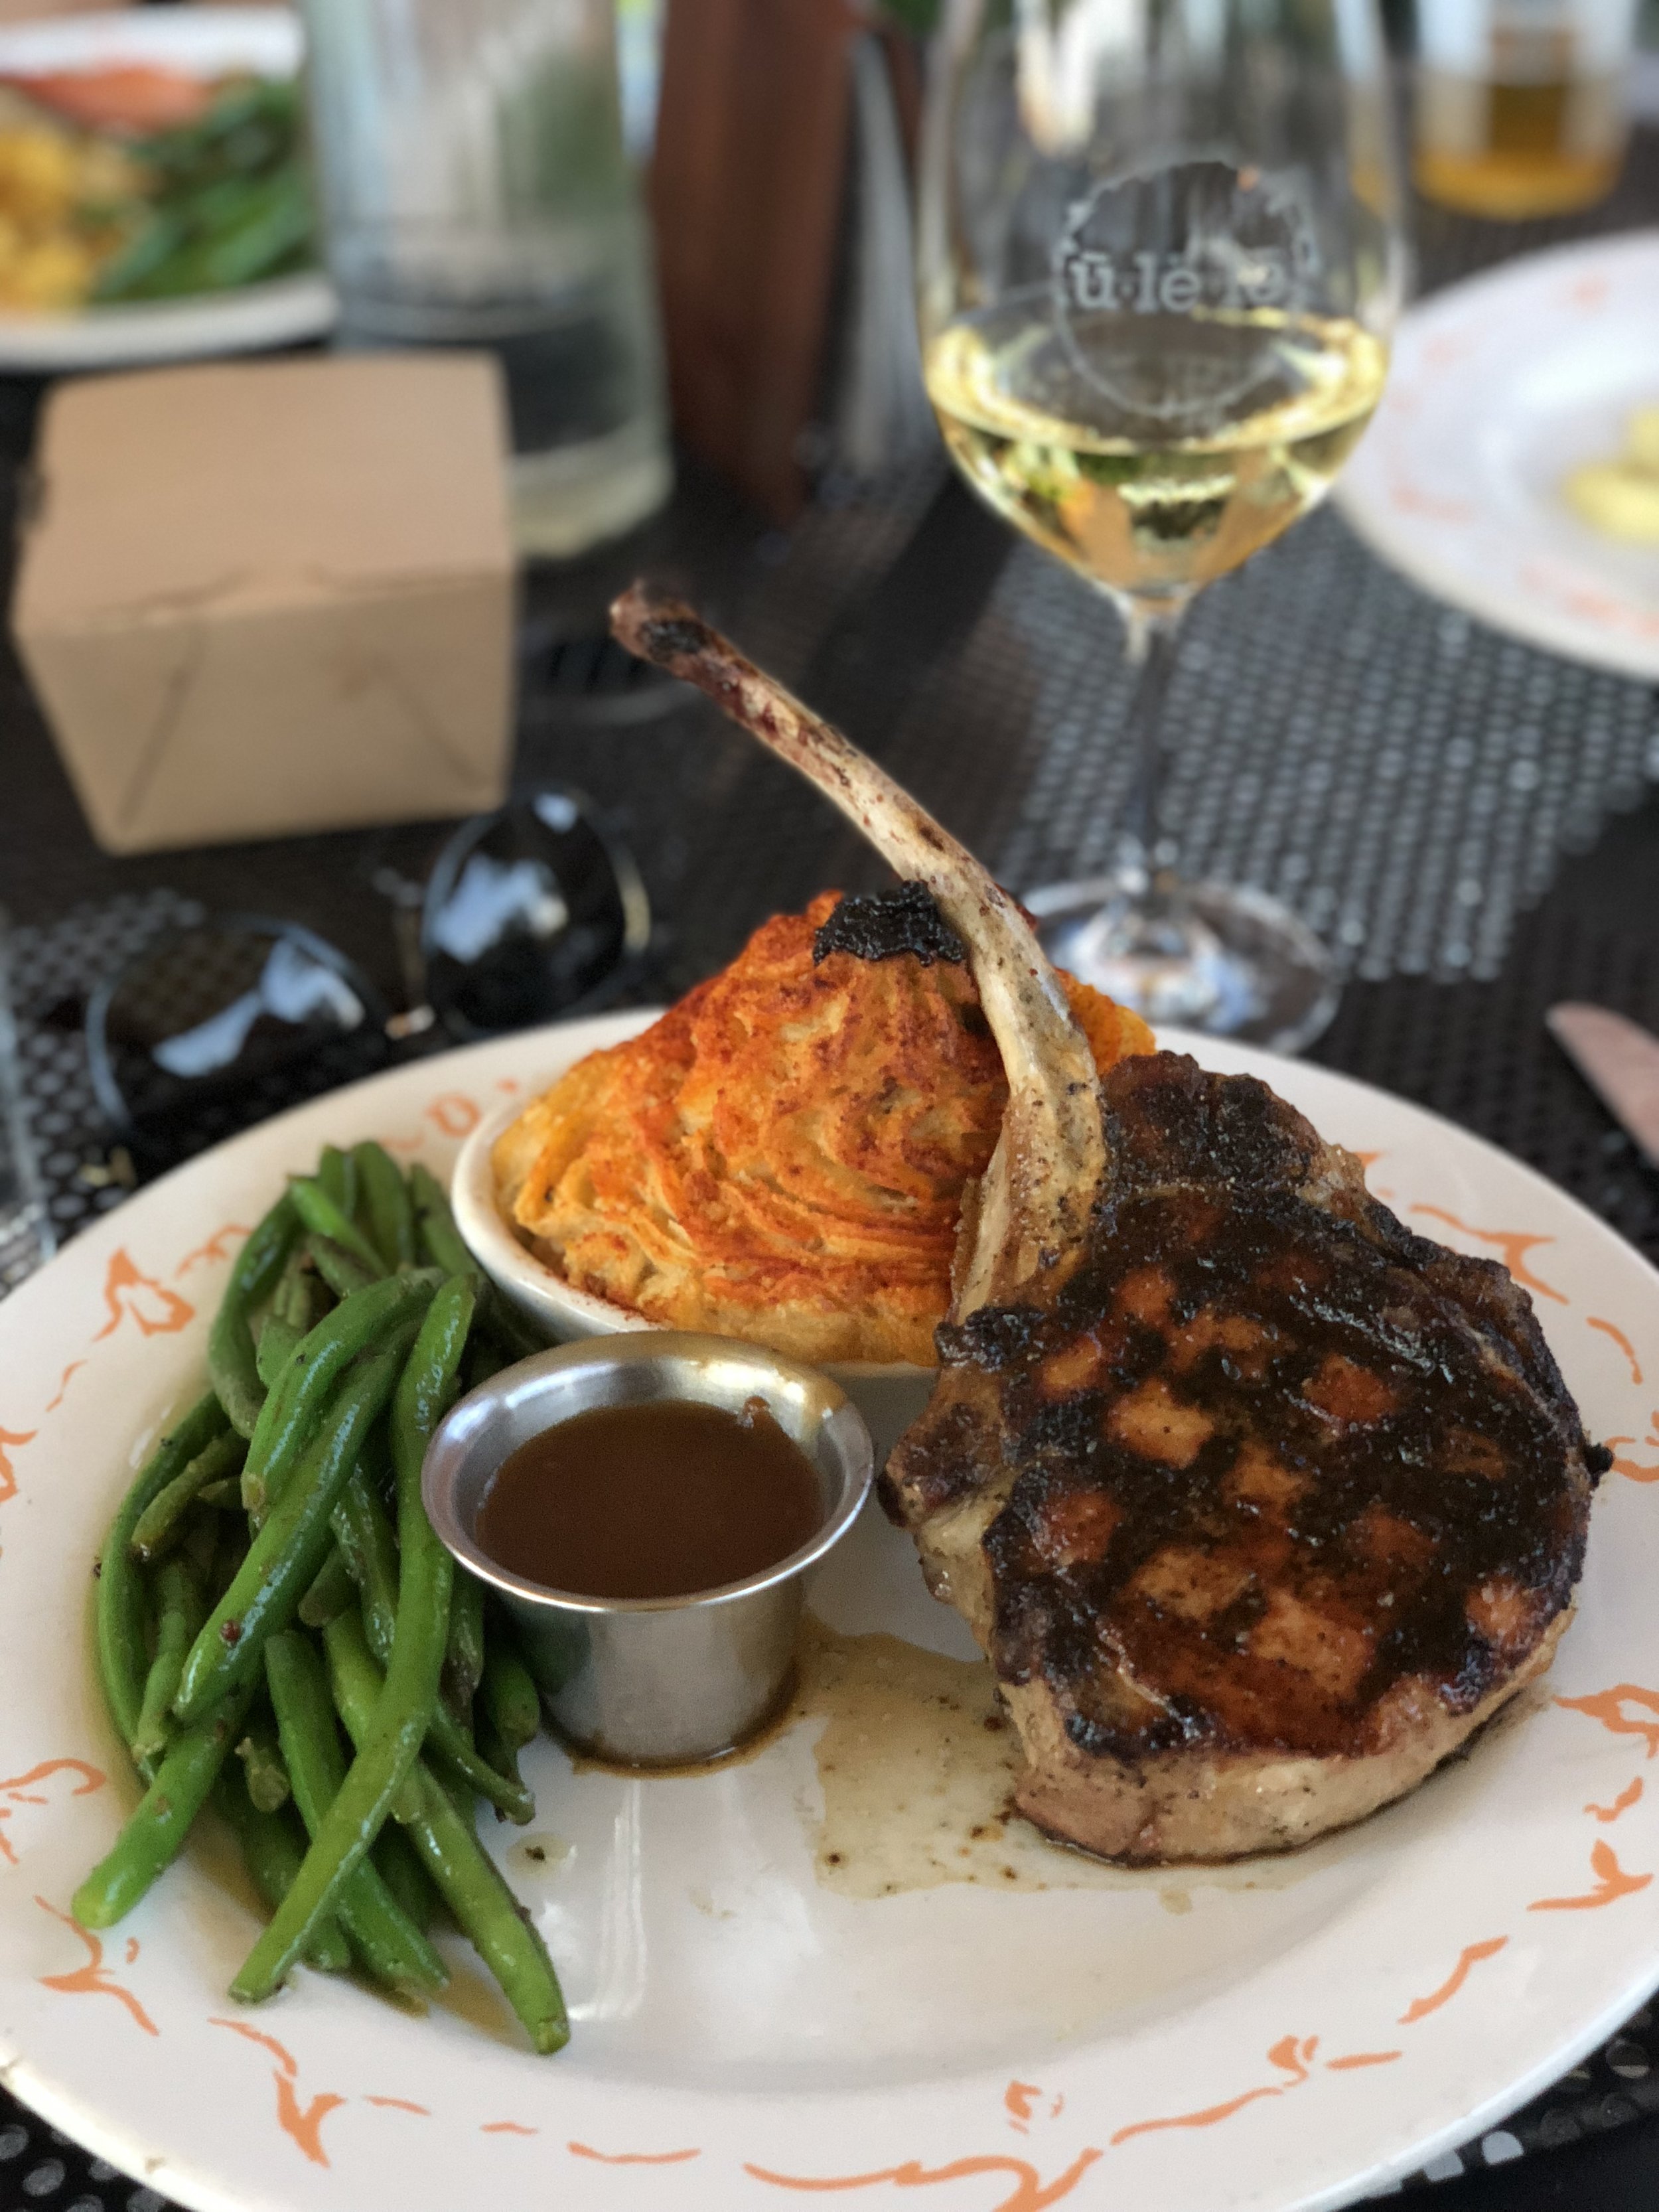 Pork Chop with carrot strings and green beans at Ulele in Tampa